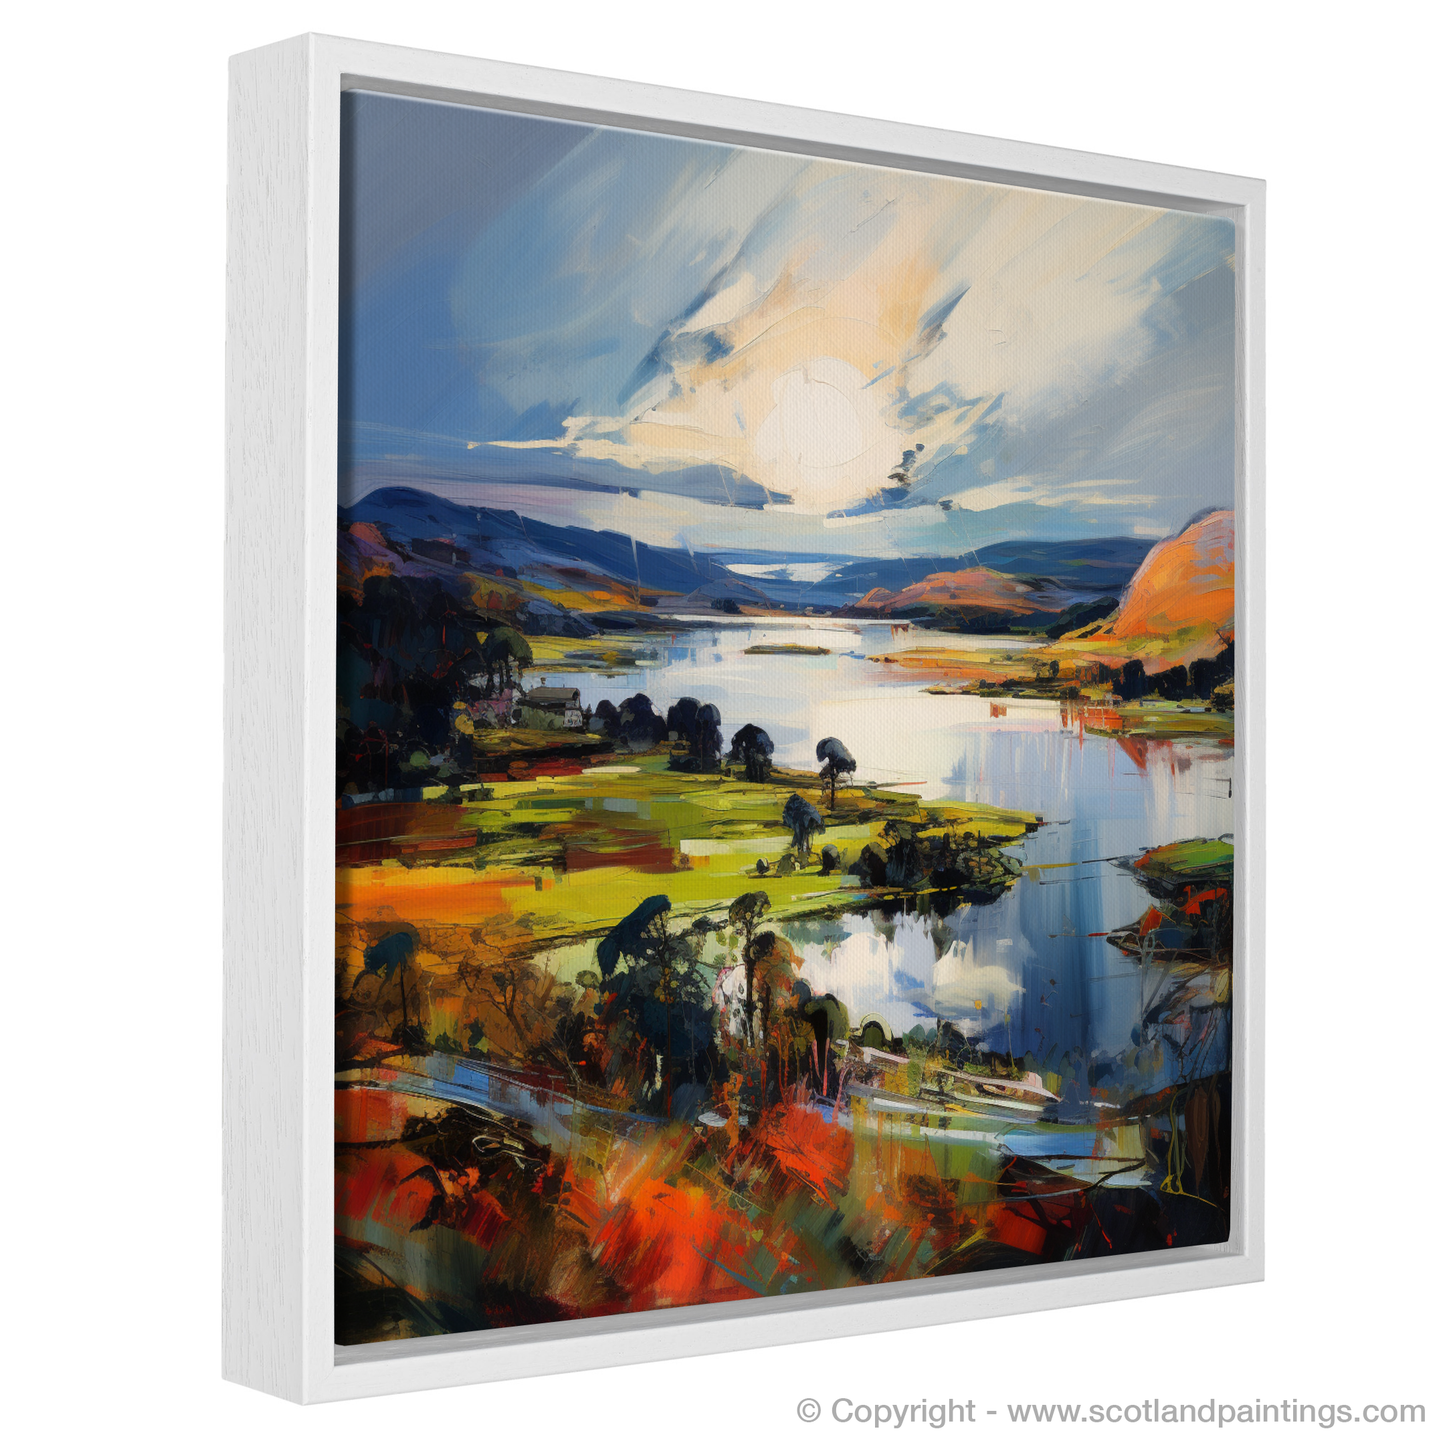 Painting and Art Print of Loch Leven, Perth and Kinross entitled "Loch Leven in Expressionist Hues".